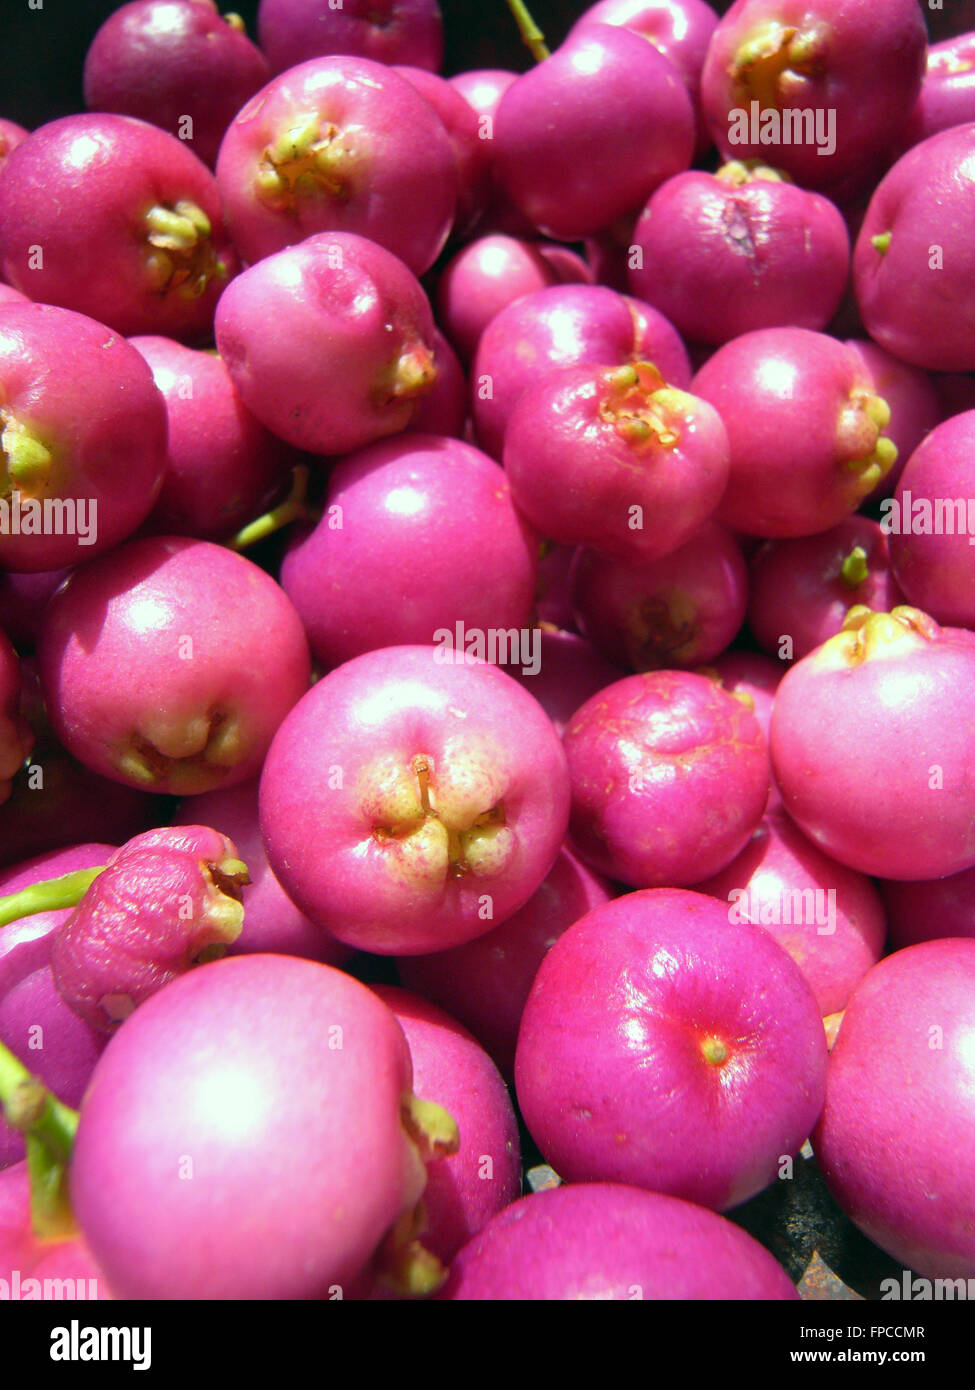 Details of freshly-picked fruits of Australian native Lilly Pilly (Syzygium australe) tree Stock Photo